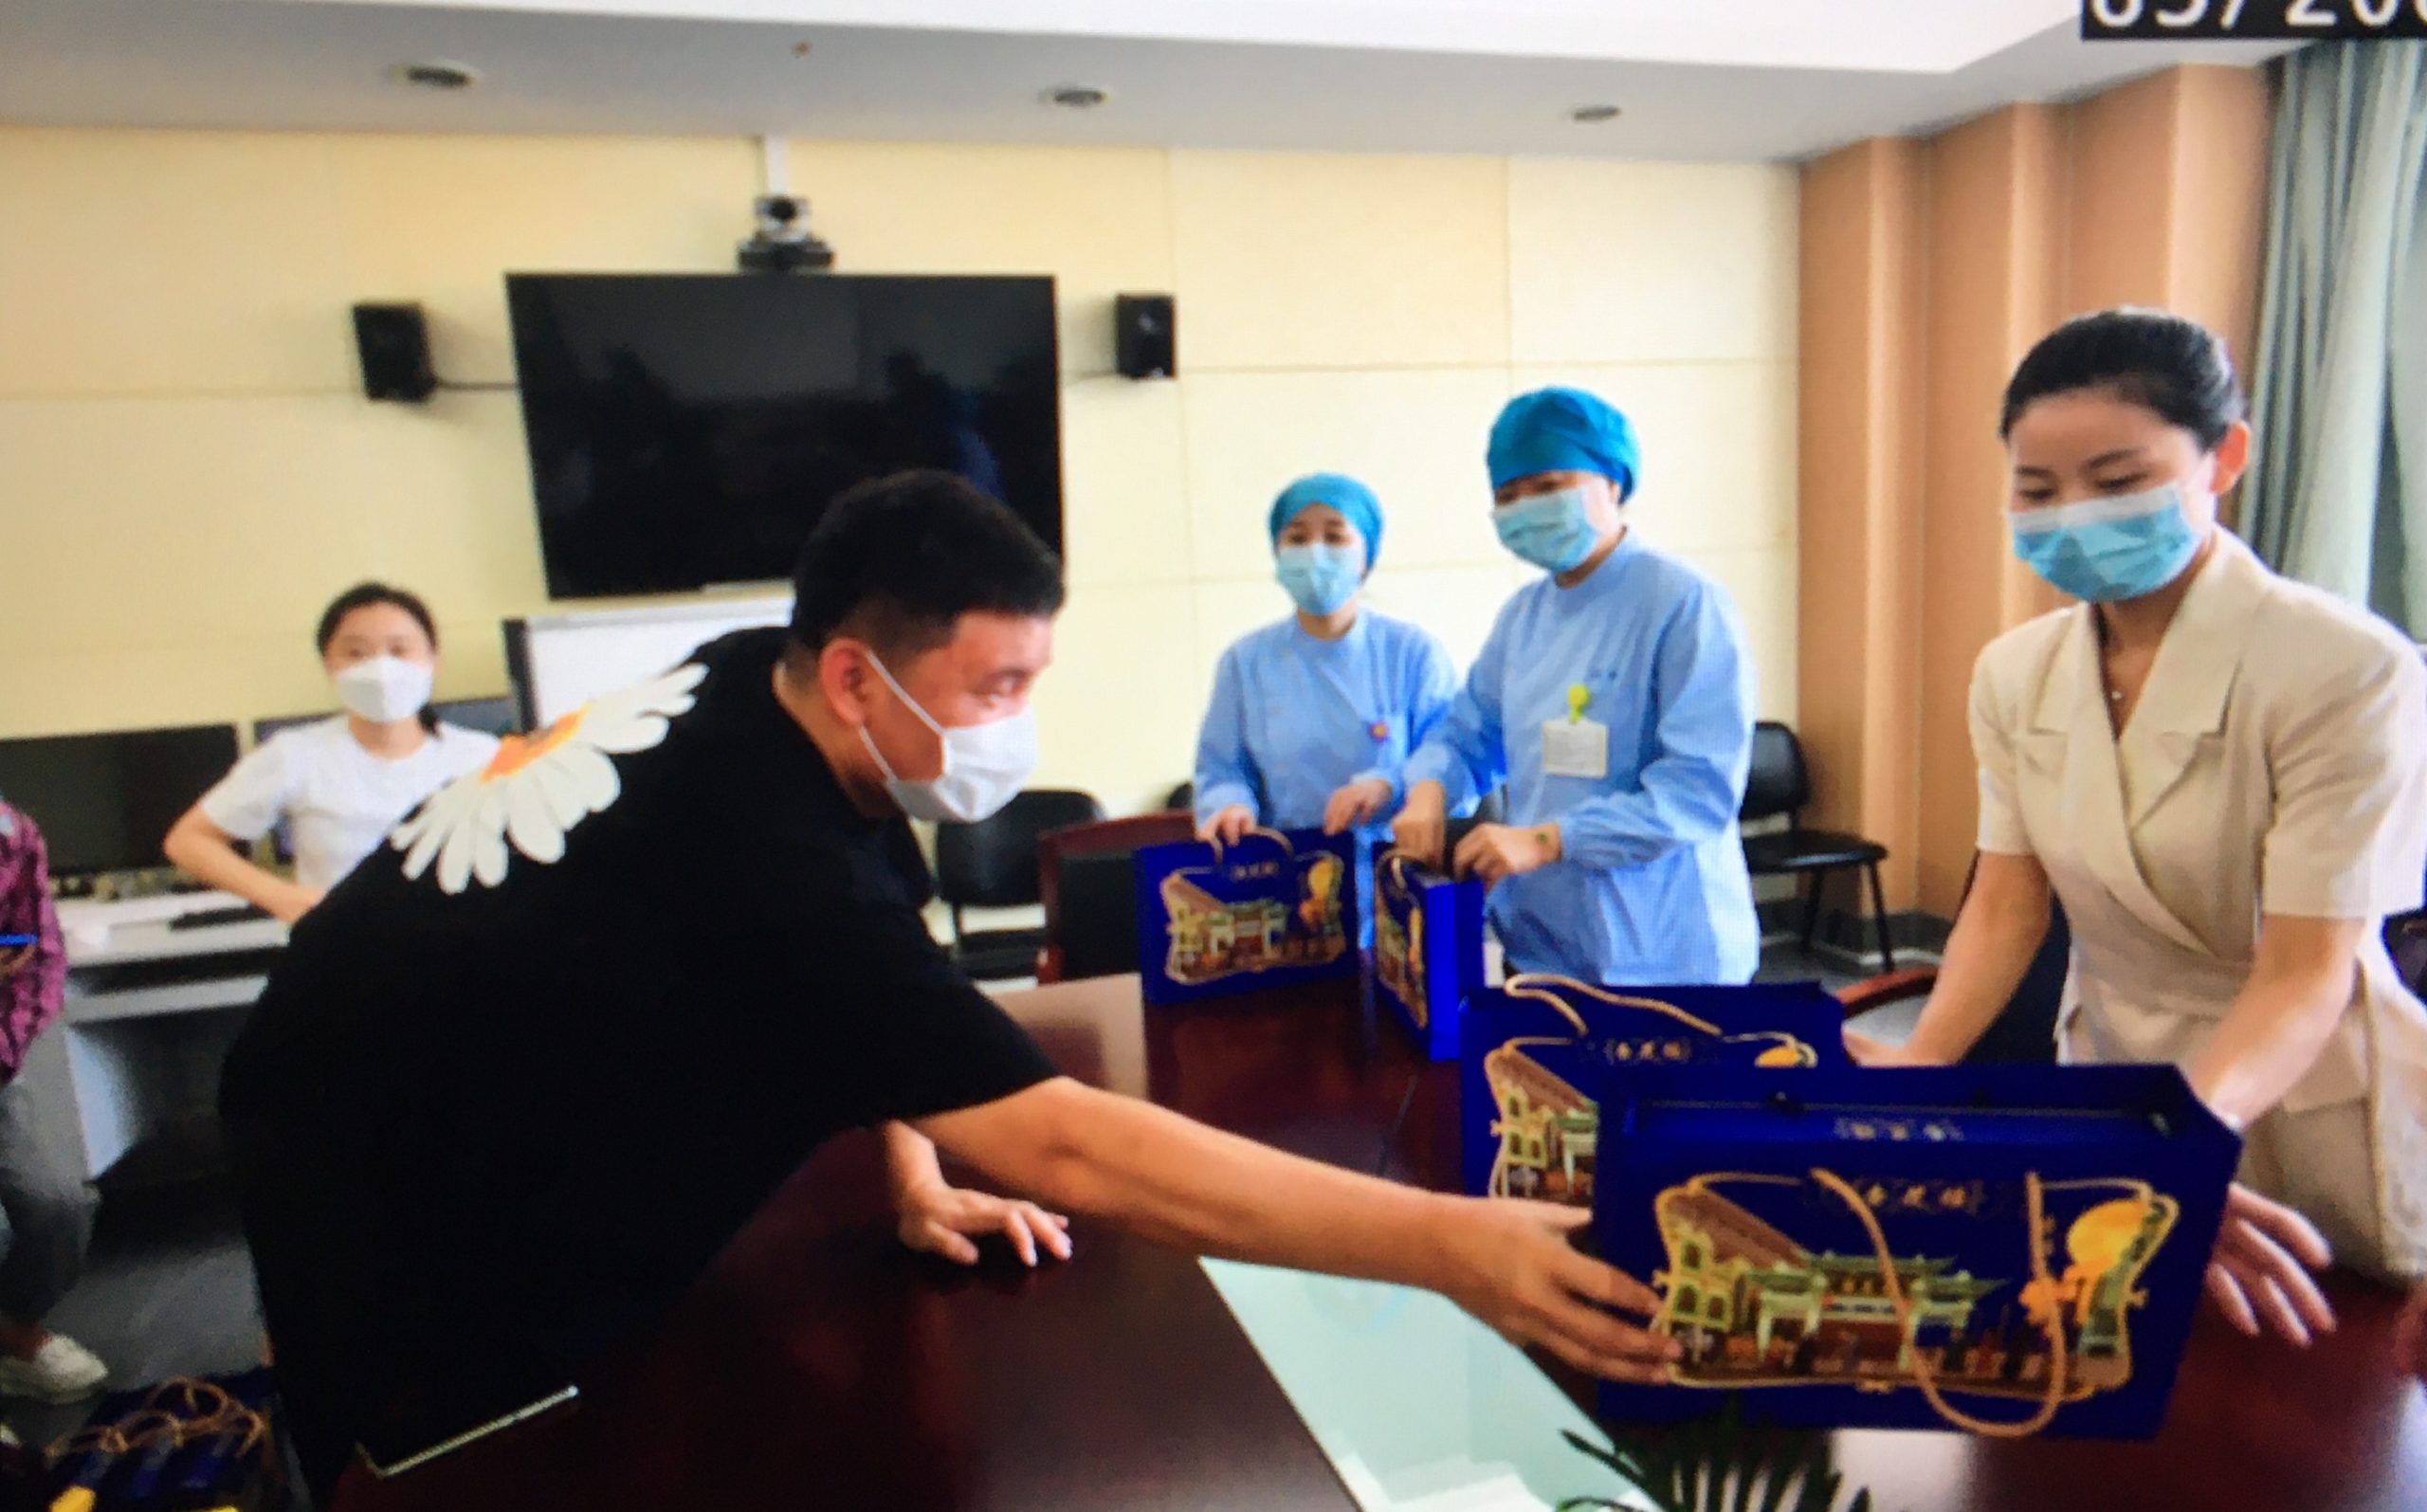 Jiang worked 12 hours a day as a cleaning staff working with doctors and nurses to treat COVID-19 patients.